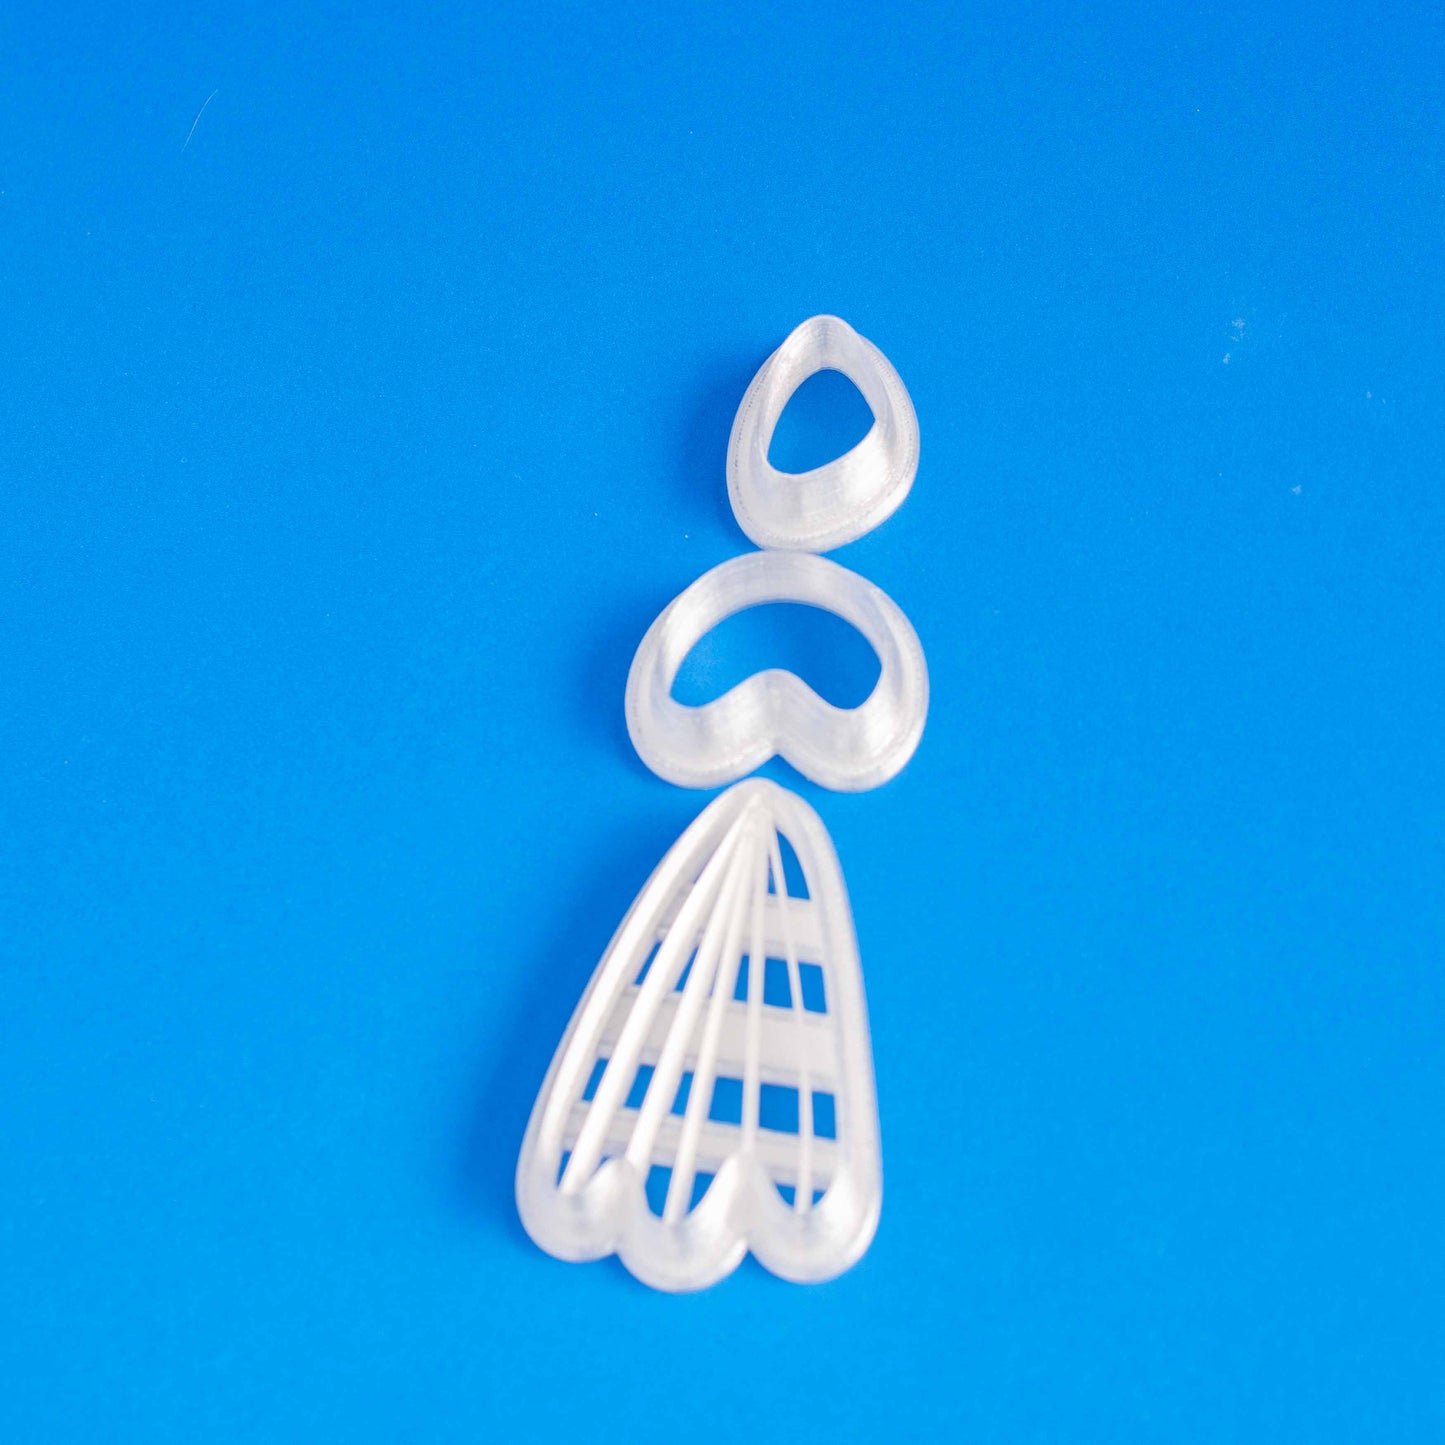 Set of polymer clay cutters in a blue background